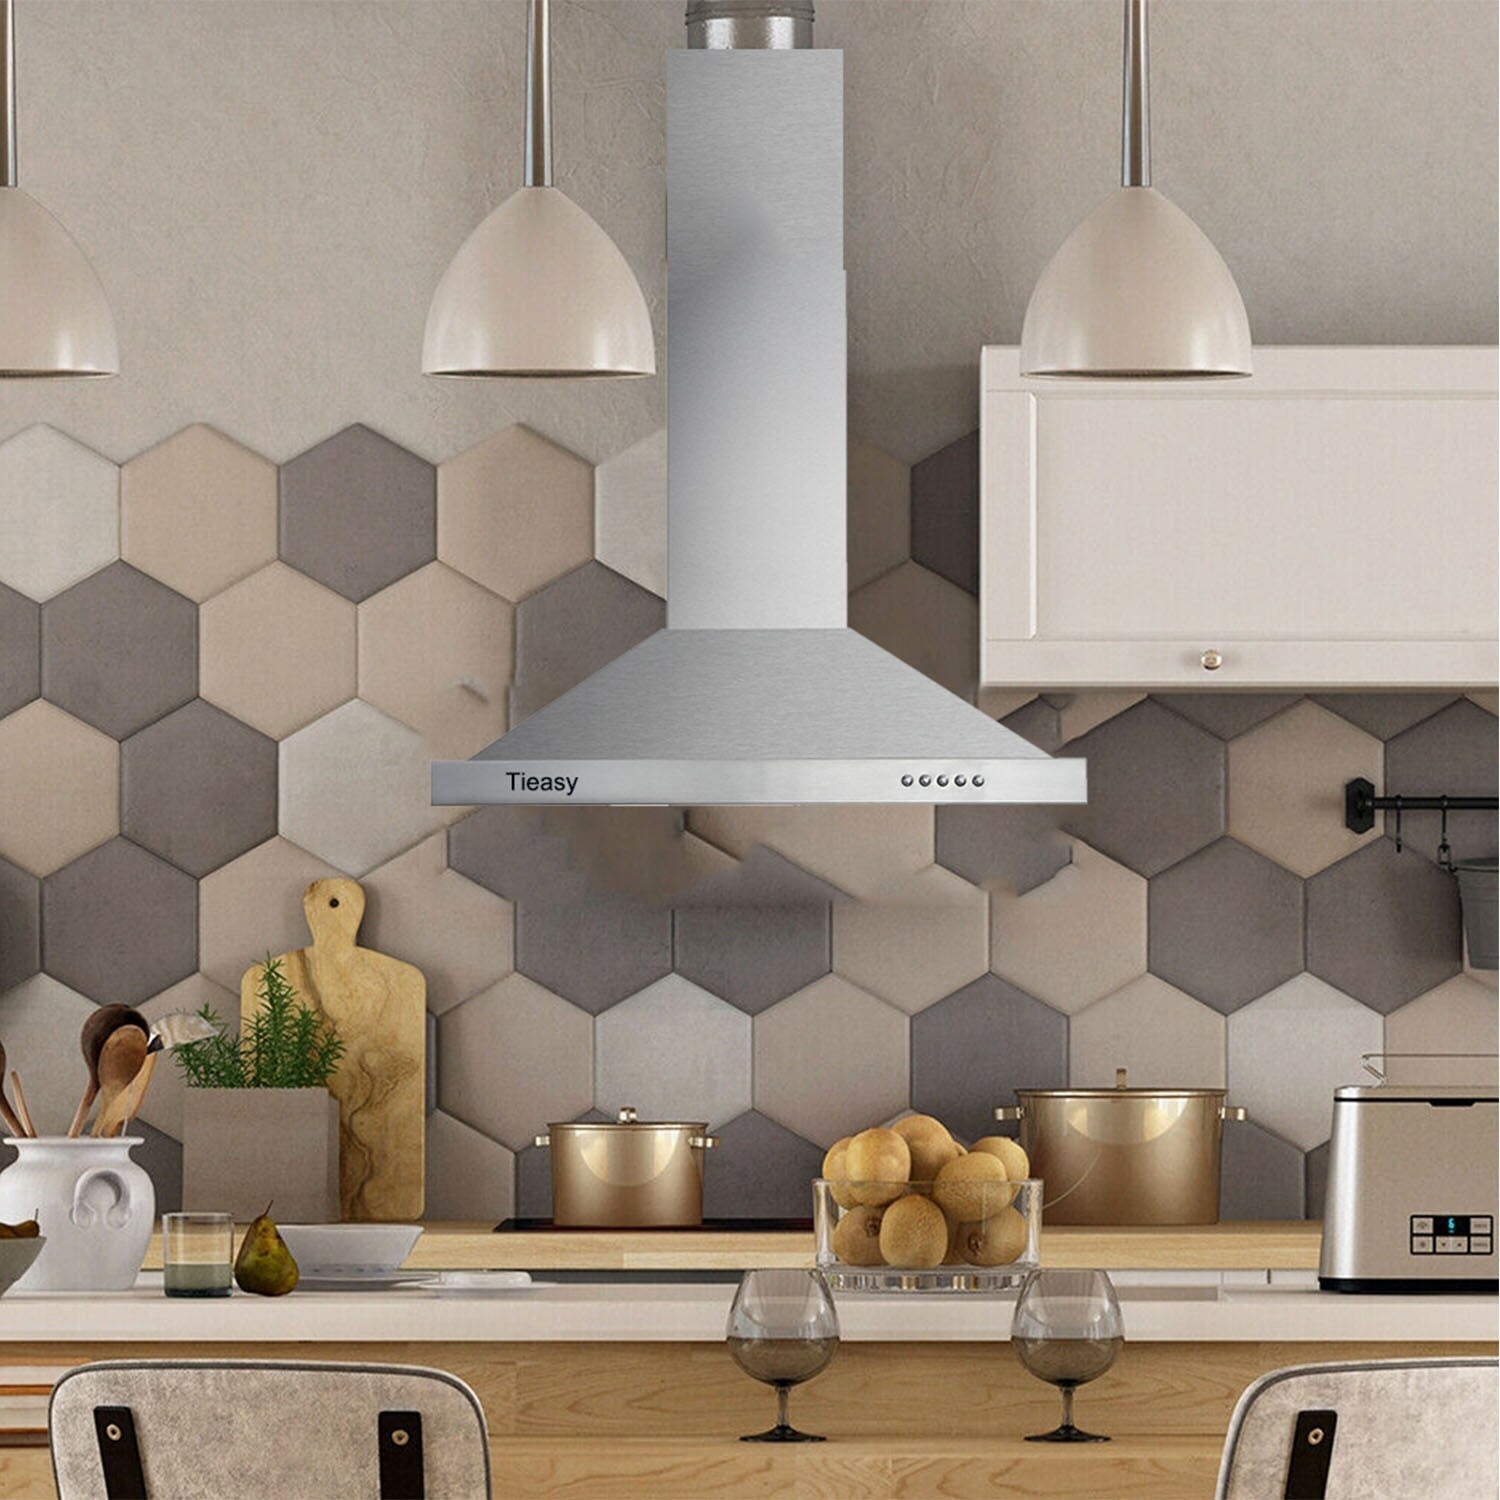 Tieasy 36 inch Island Range Hood 700 CFM, 4 LED Lights 5-Layer Filters, Kitchen Hood Ducted/Ductless Convertible